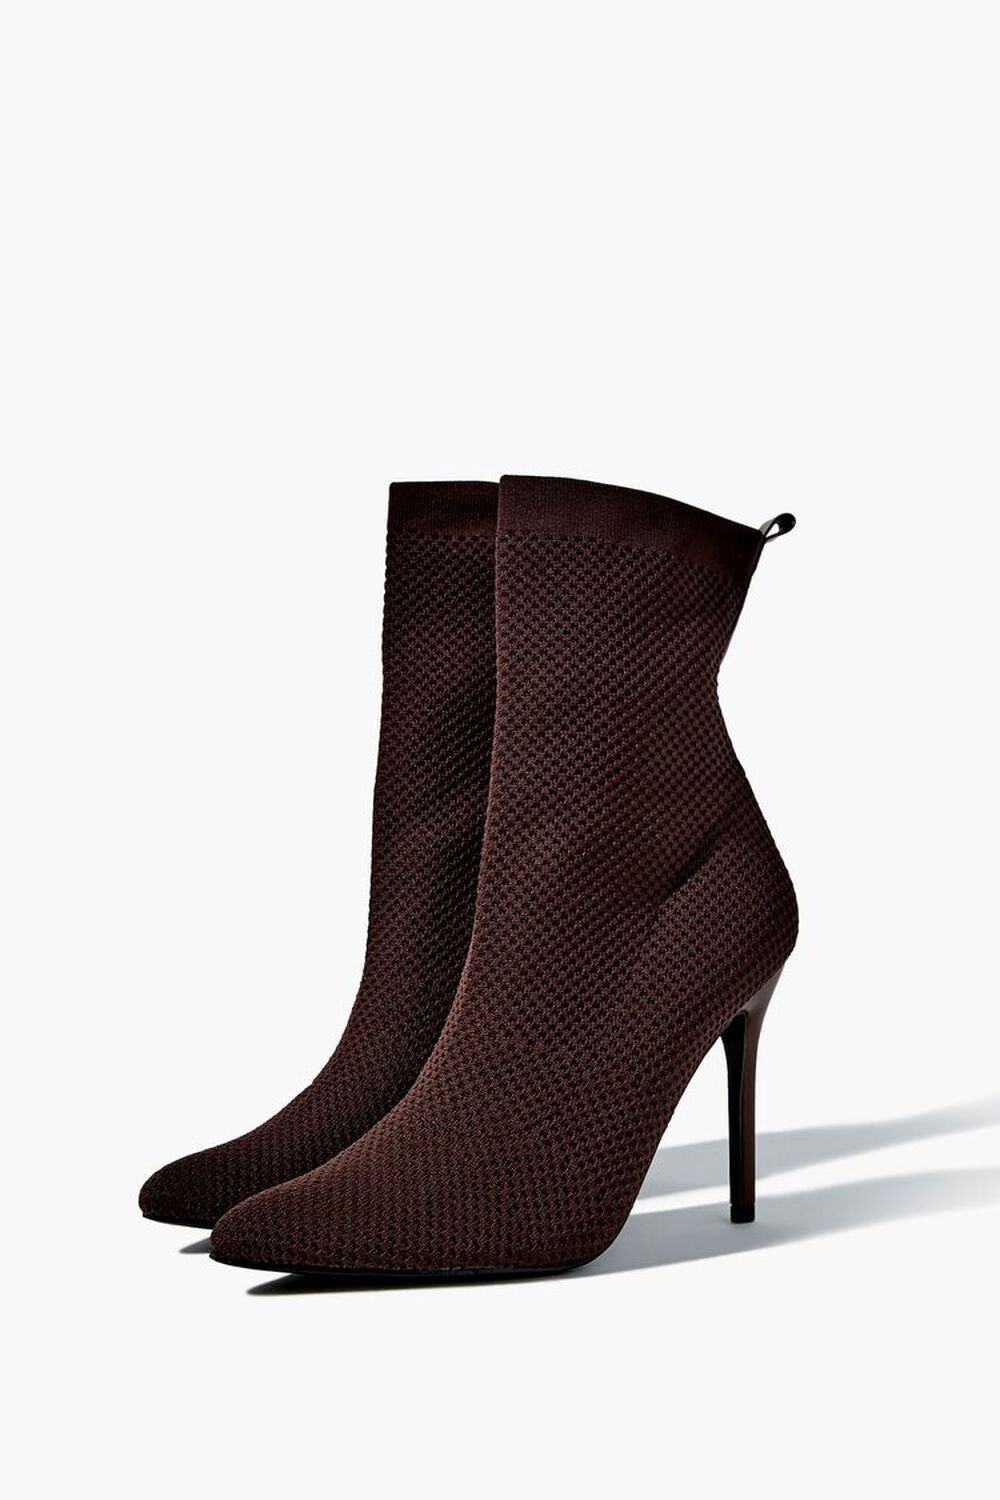 BROWN Pointed-Toe Stiletto Booties, image 1